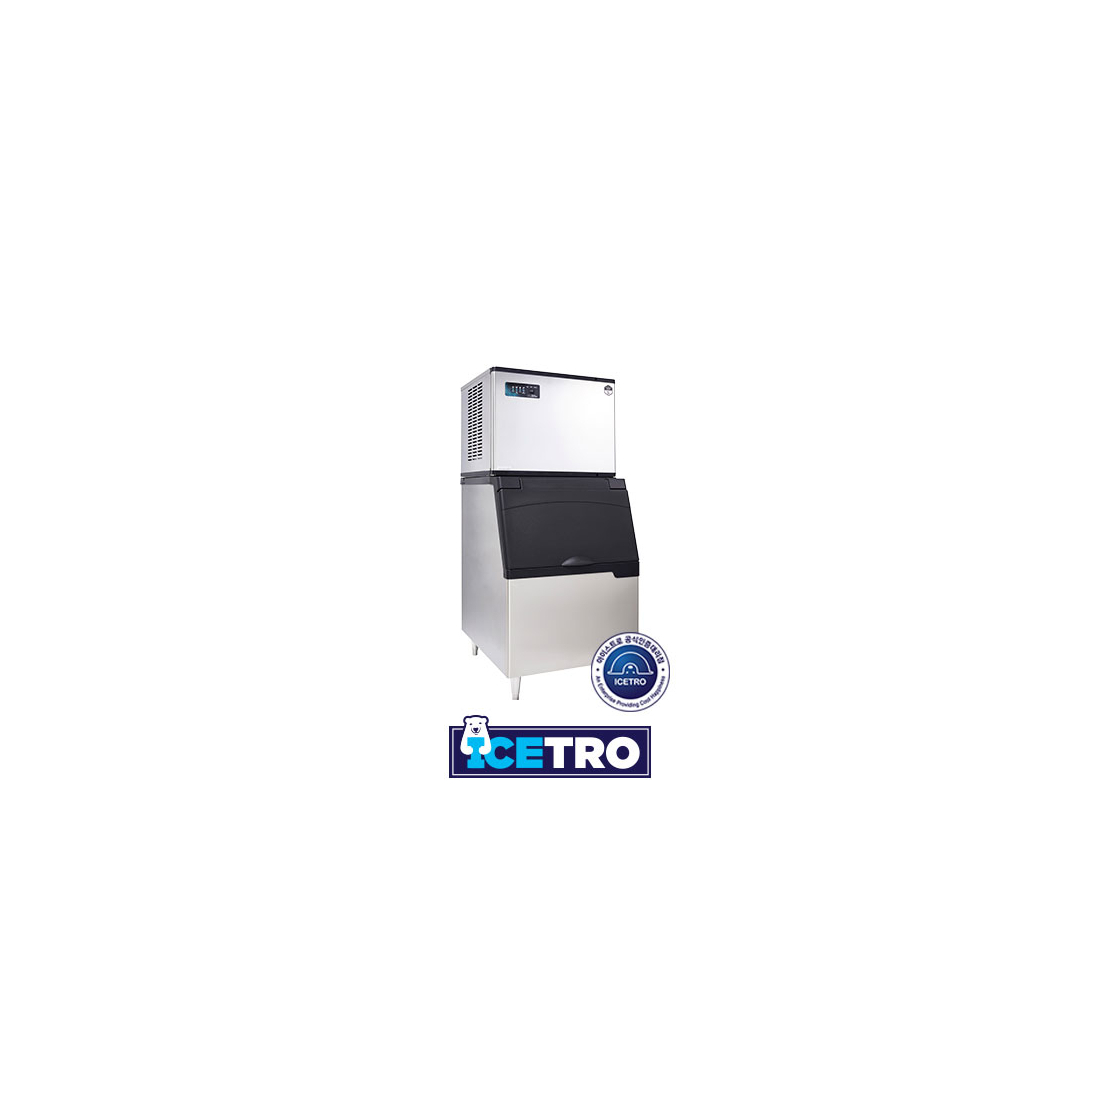 Icetro ,IM-350AR, Commercial Ice Maker 330Kg/Day|mkayn|مكاين